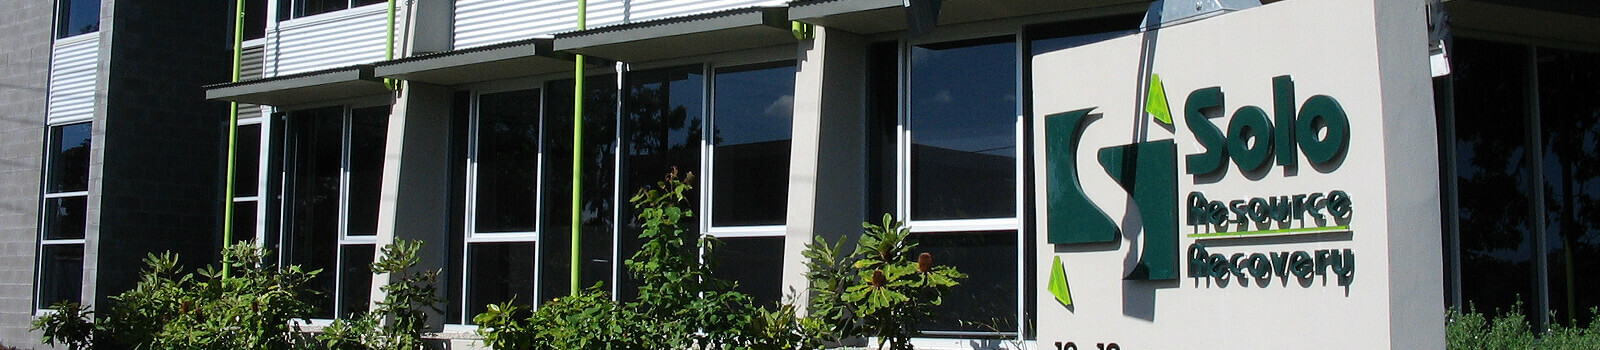 Commercial Glass Replacement banner image